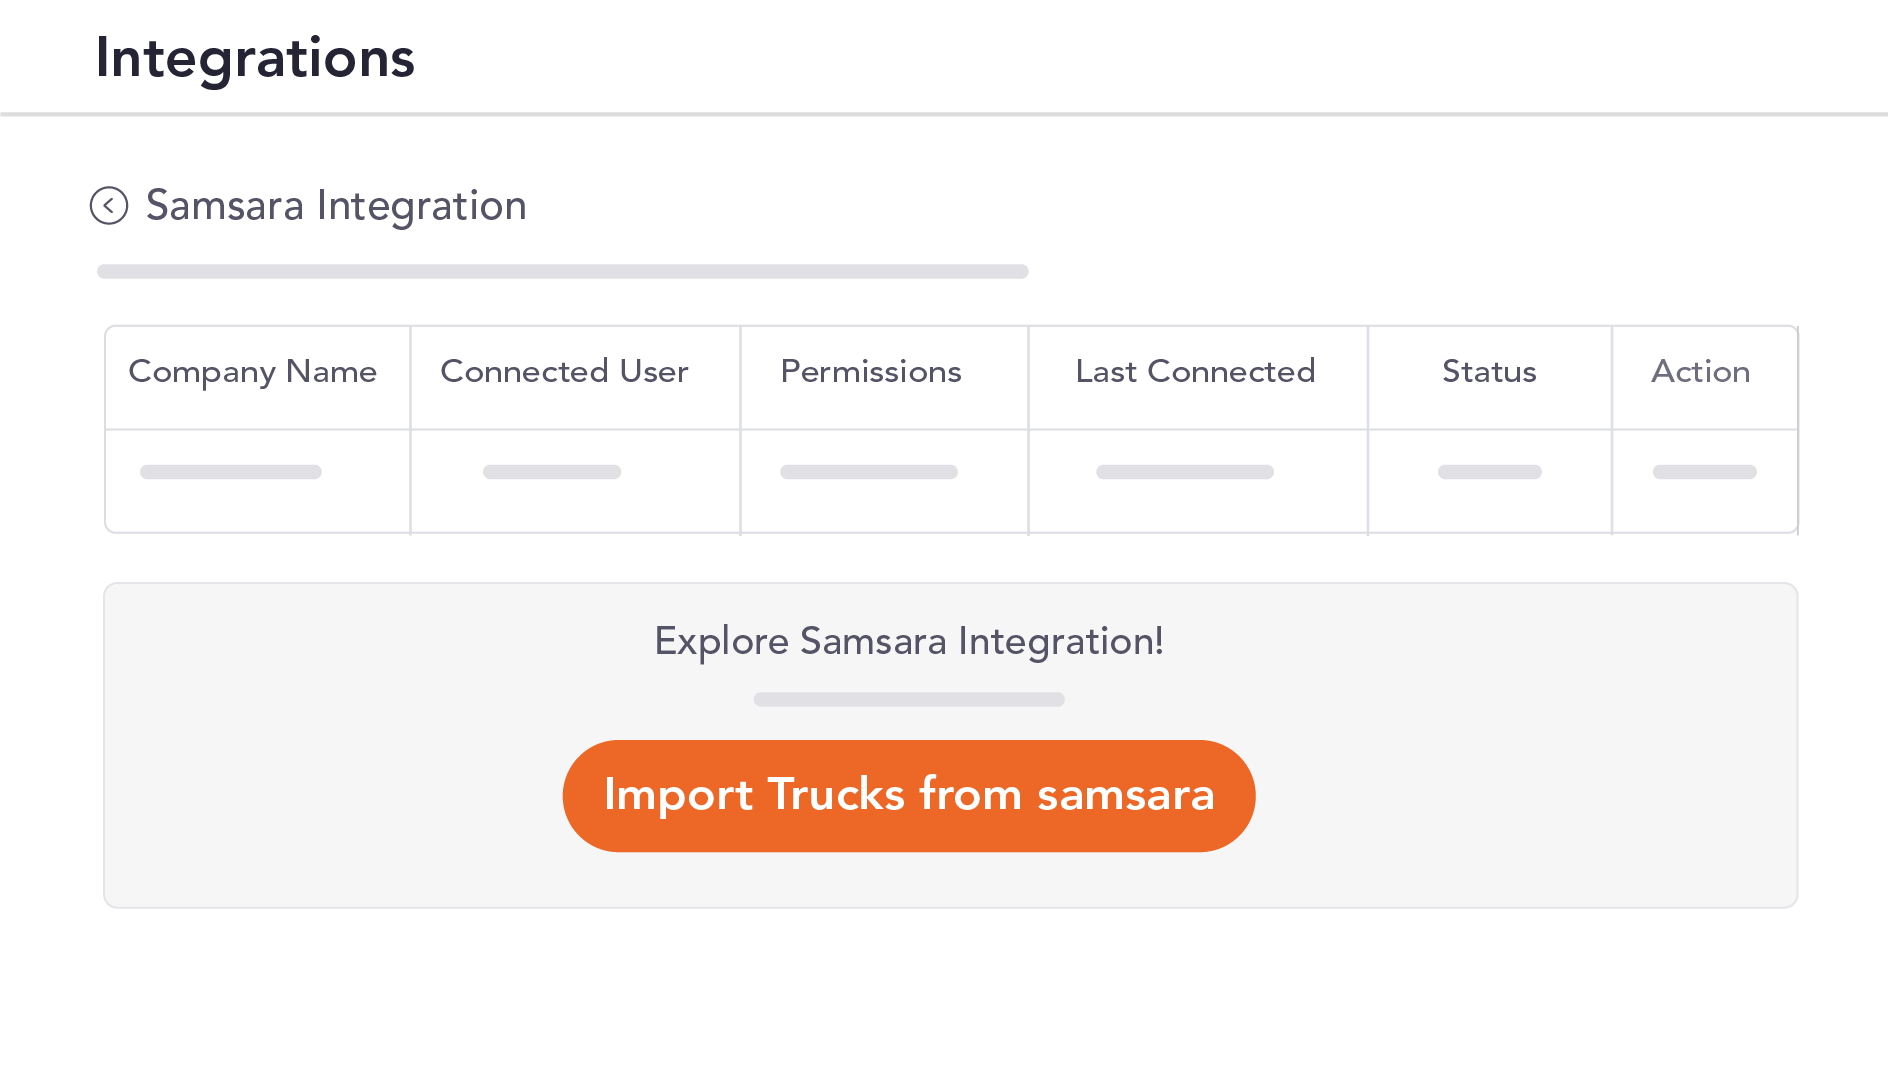 Connect with your Samsara Account and Import Trucks